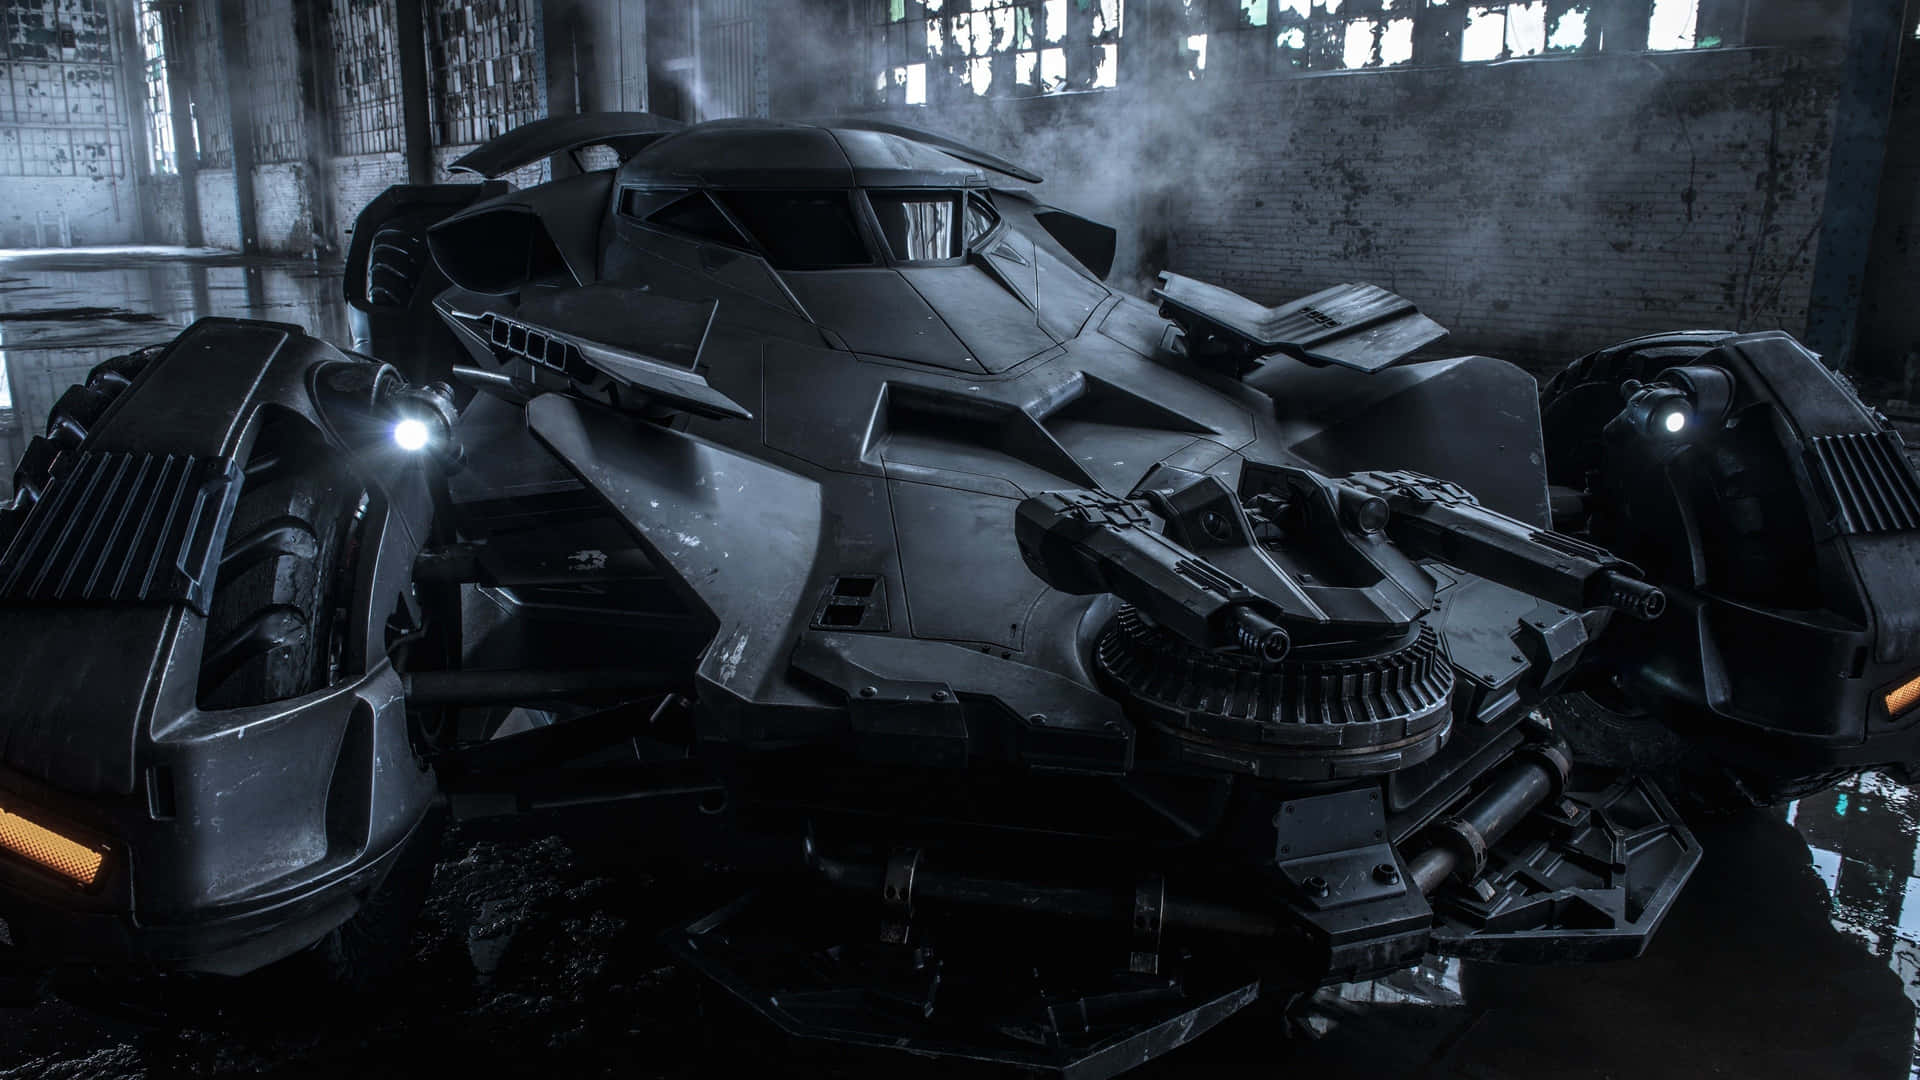 Magnificent 4K Batmobile ready for take-off.